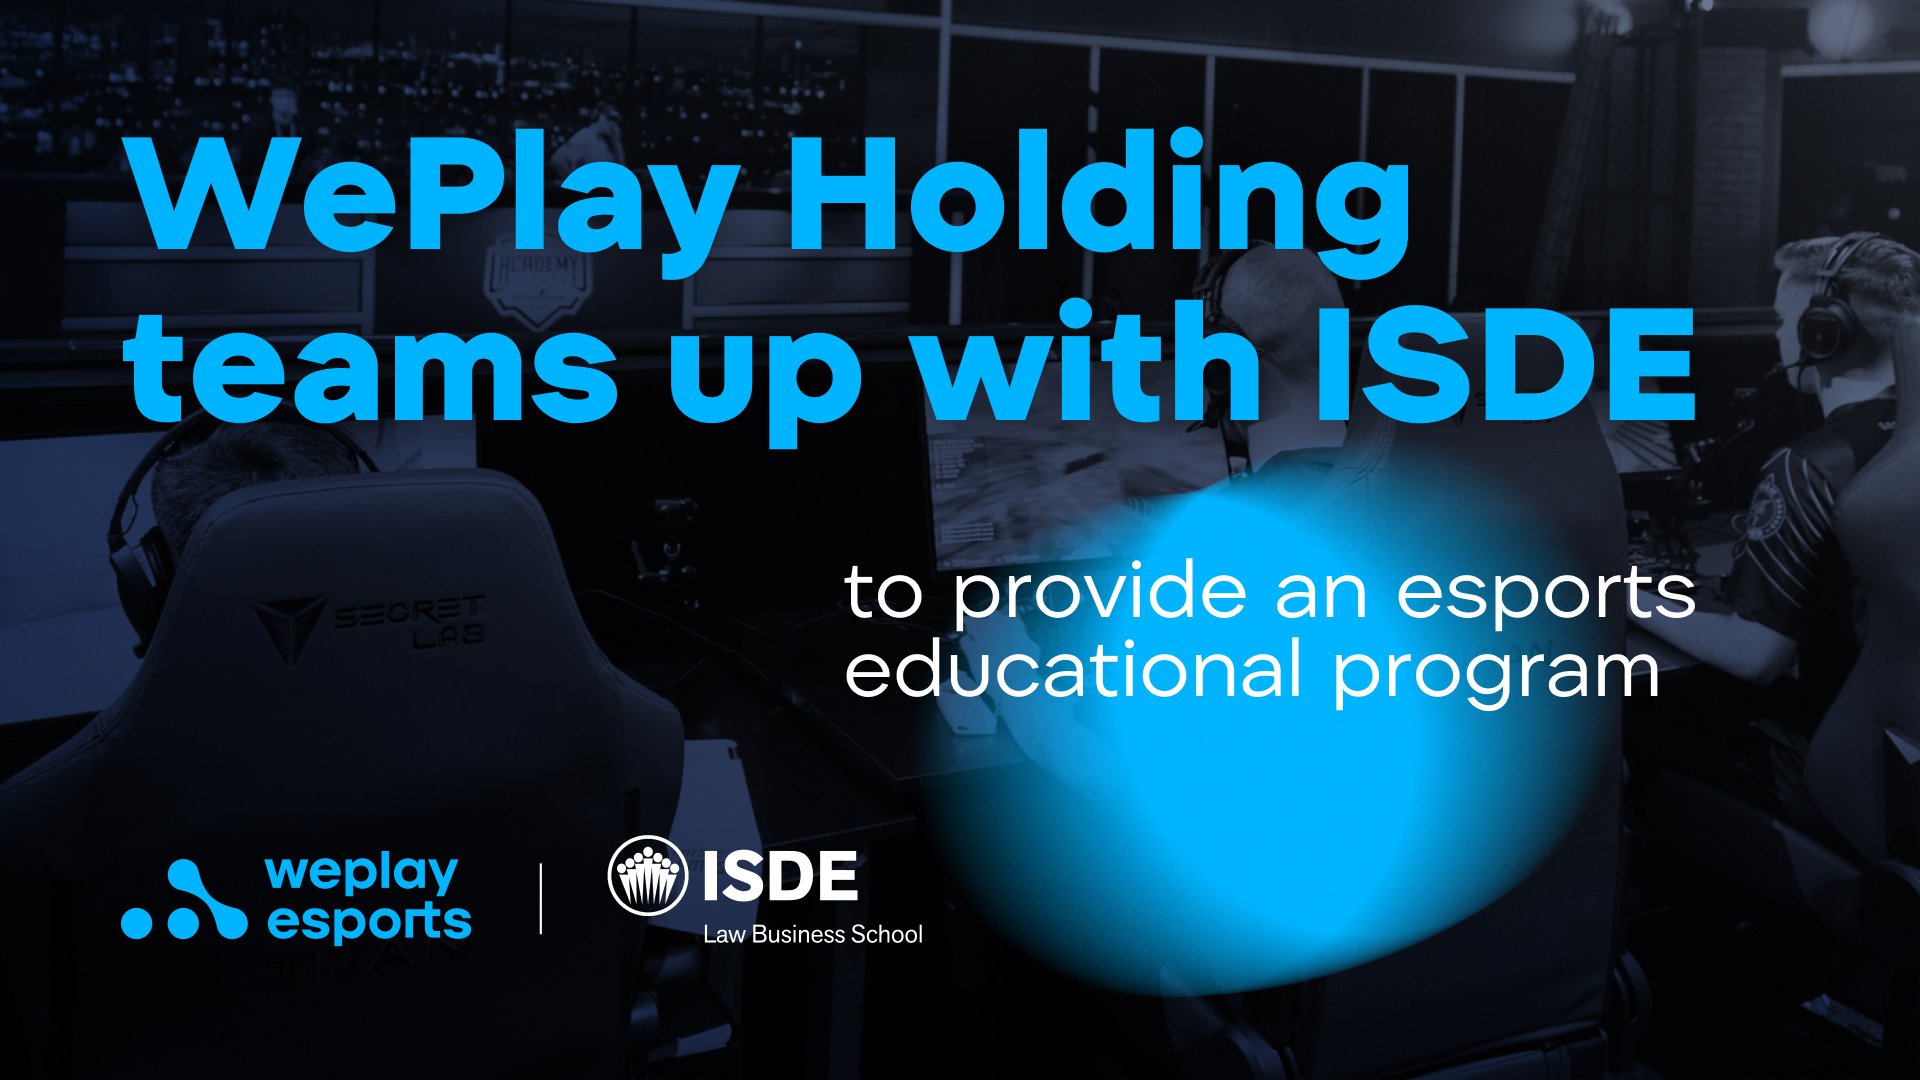 WePlay Holding teams up with ISDE to provide an esports educational program. Image: WePlay Holding